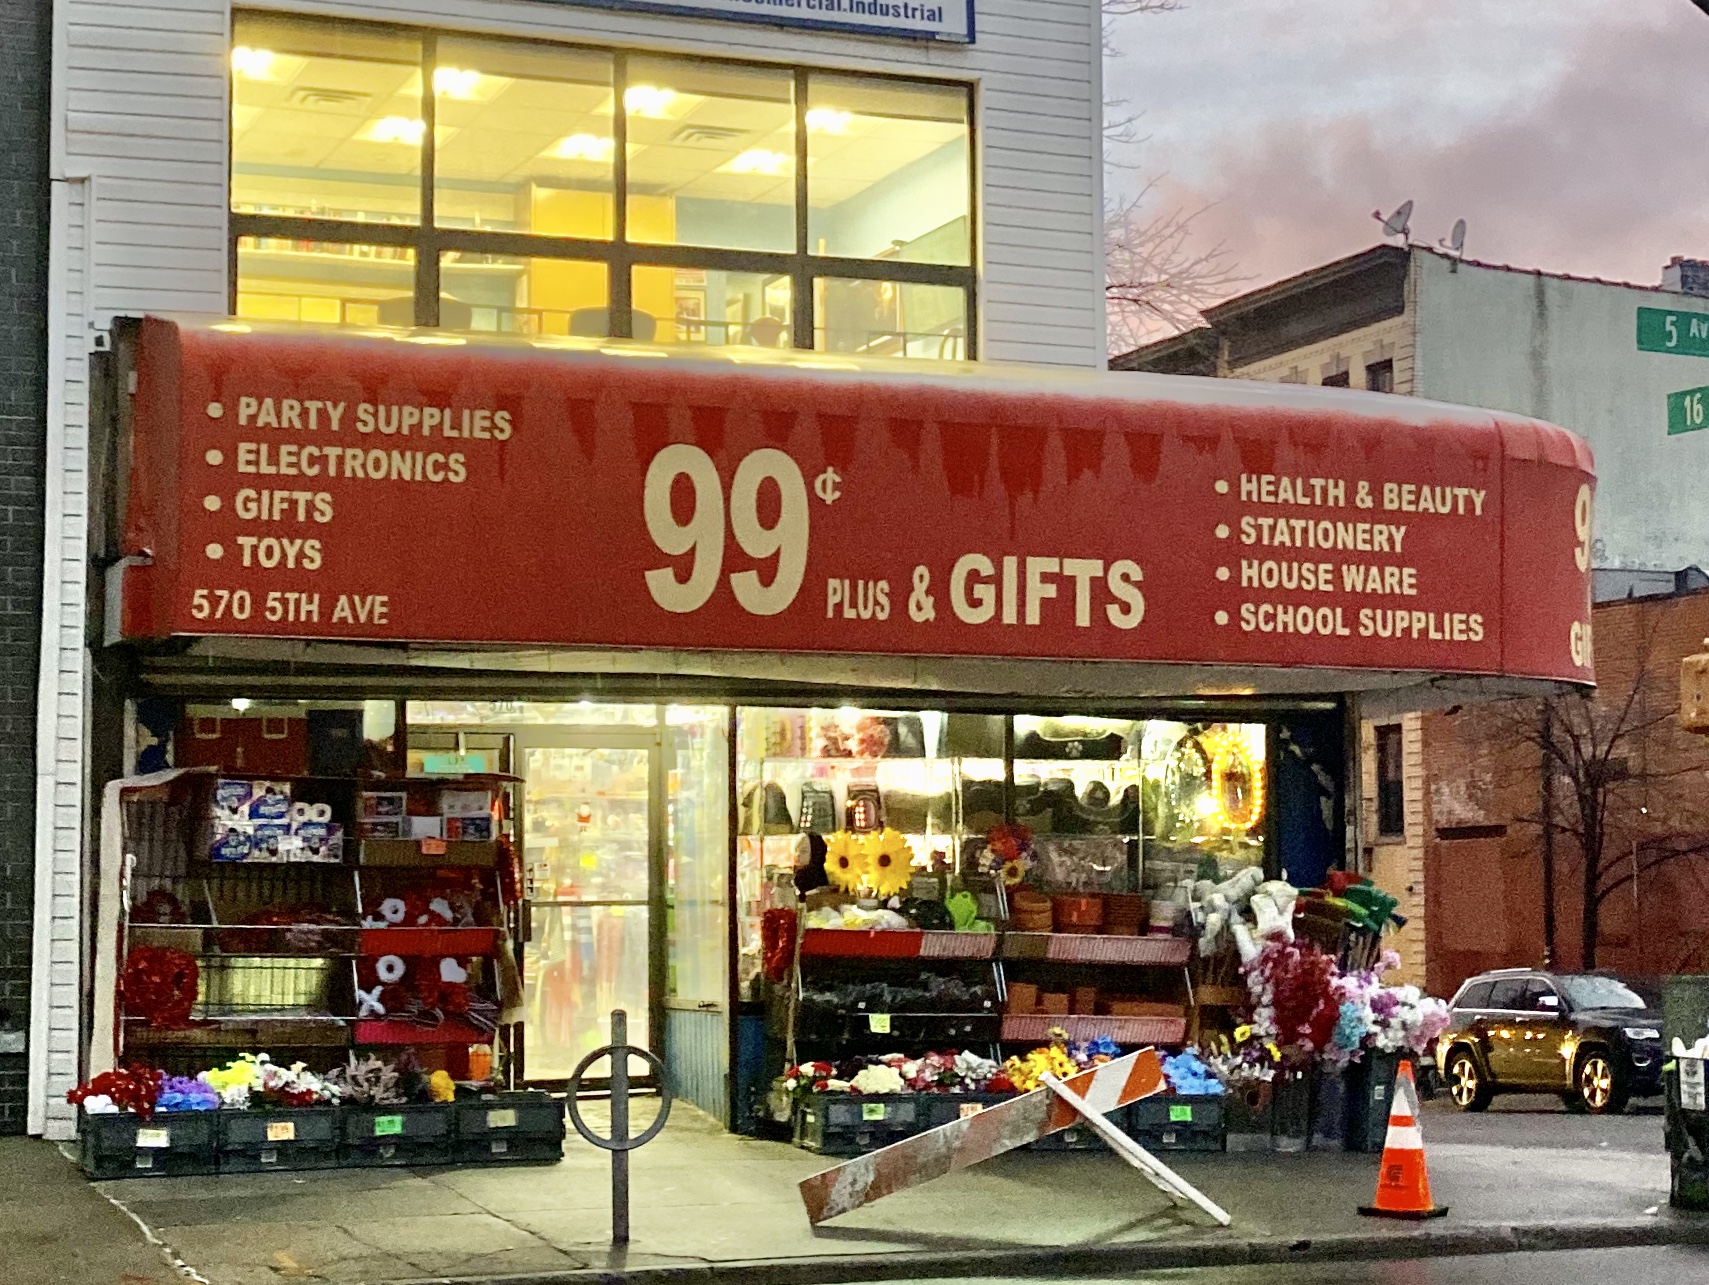 99₵ Plus & Gifts